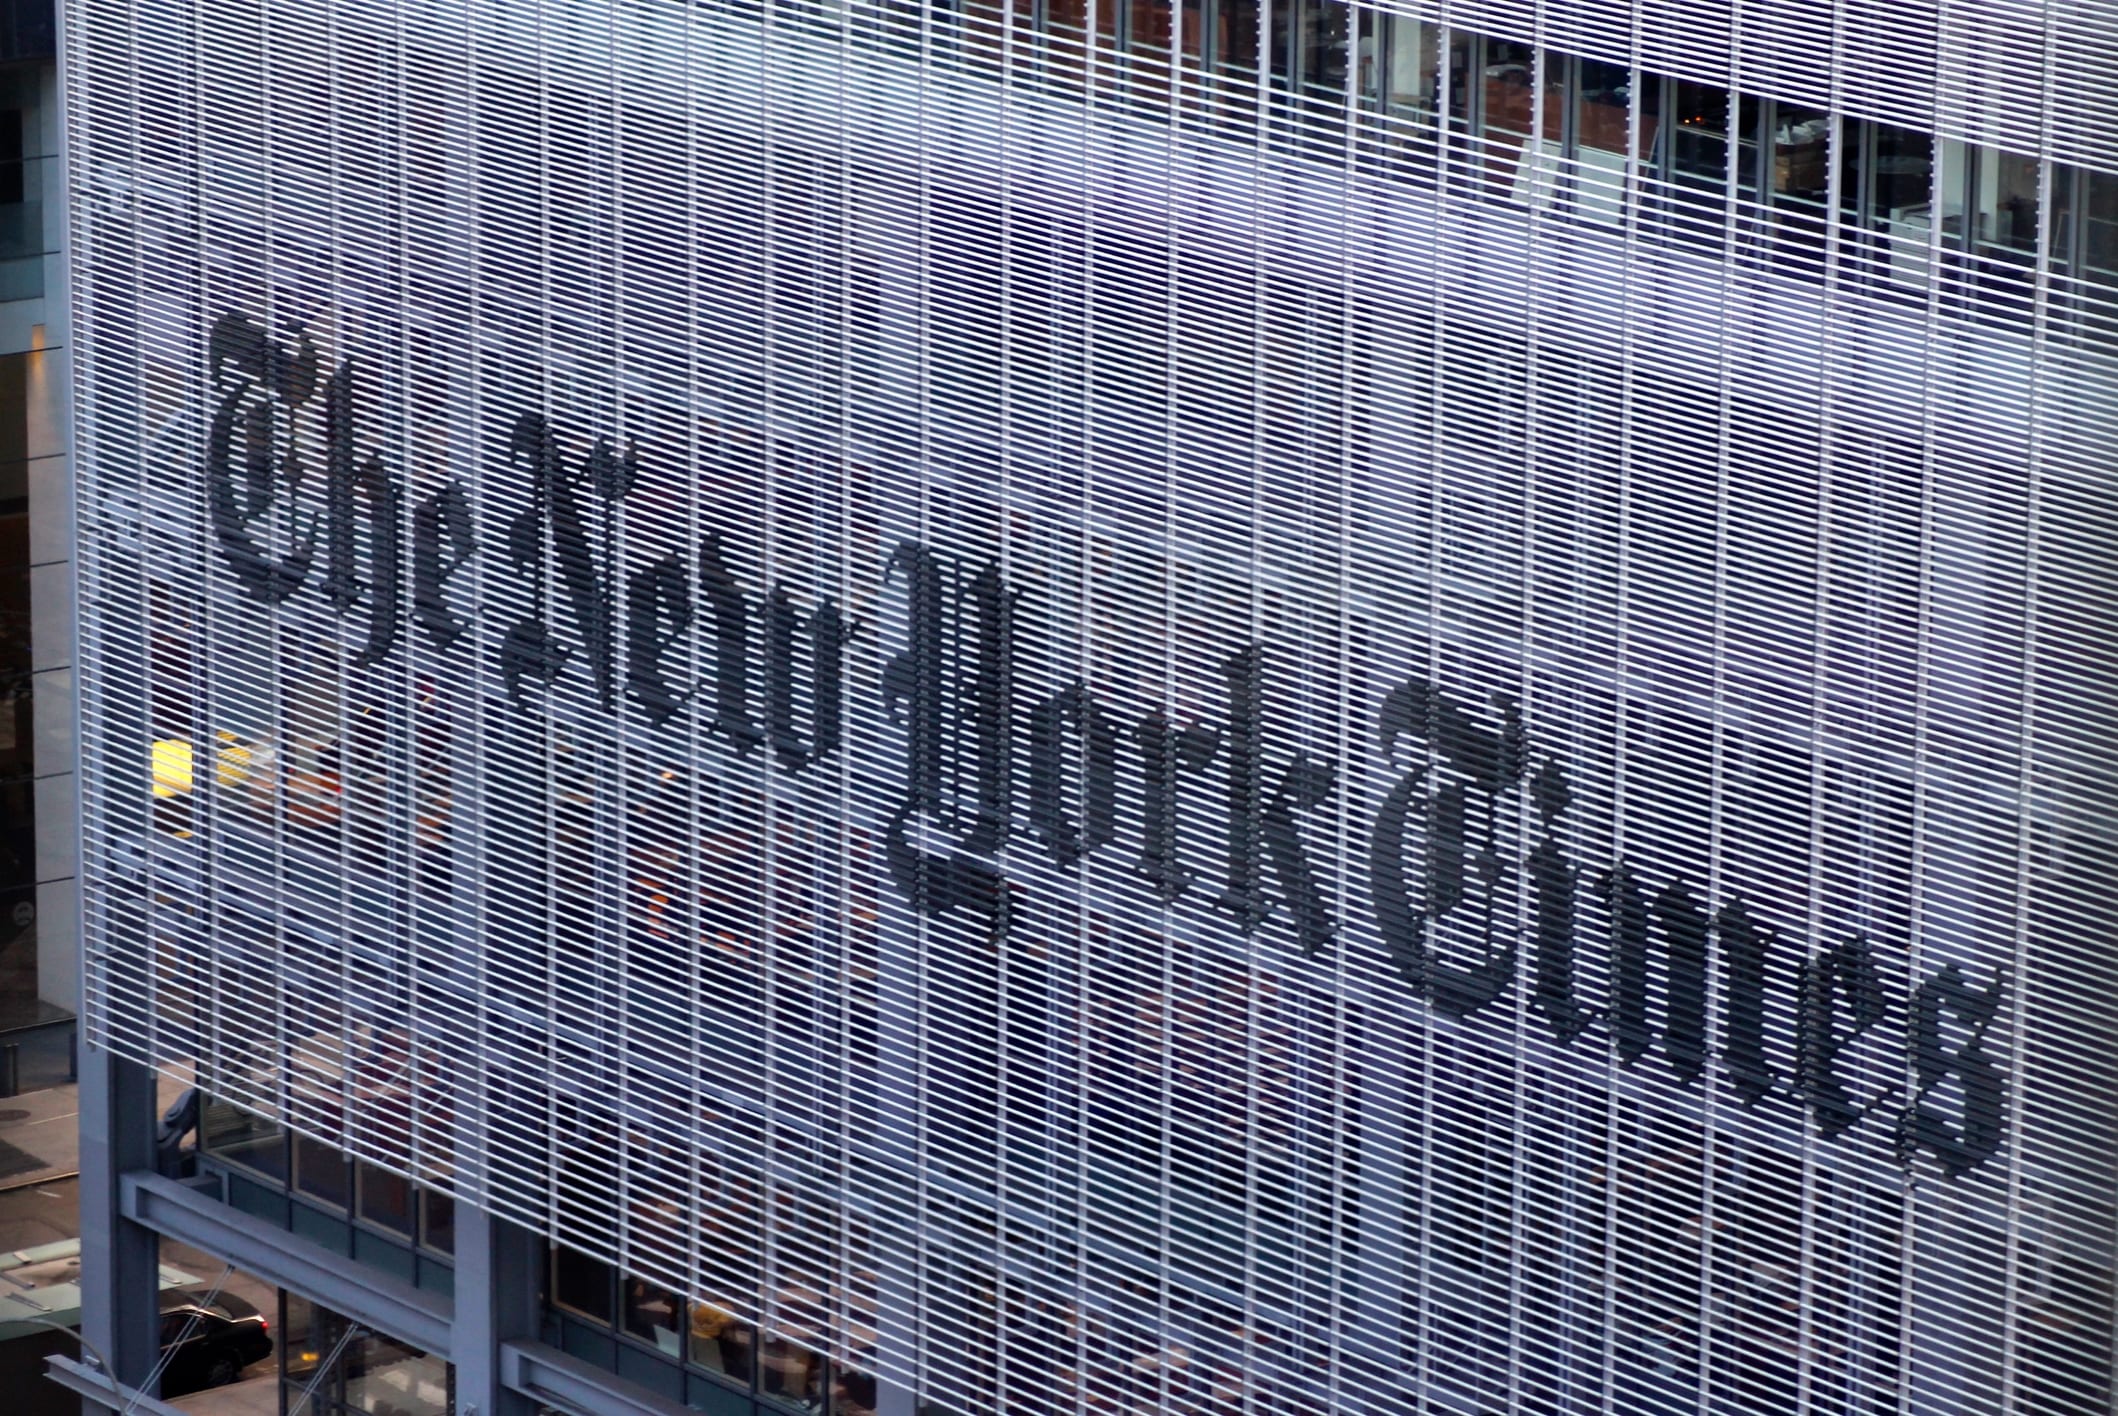 What to Do About the New York Times Article on Chain Pharmacies